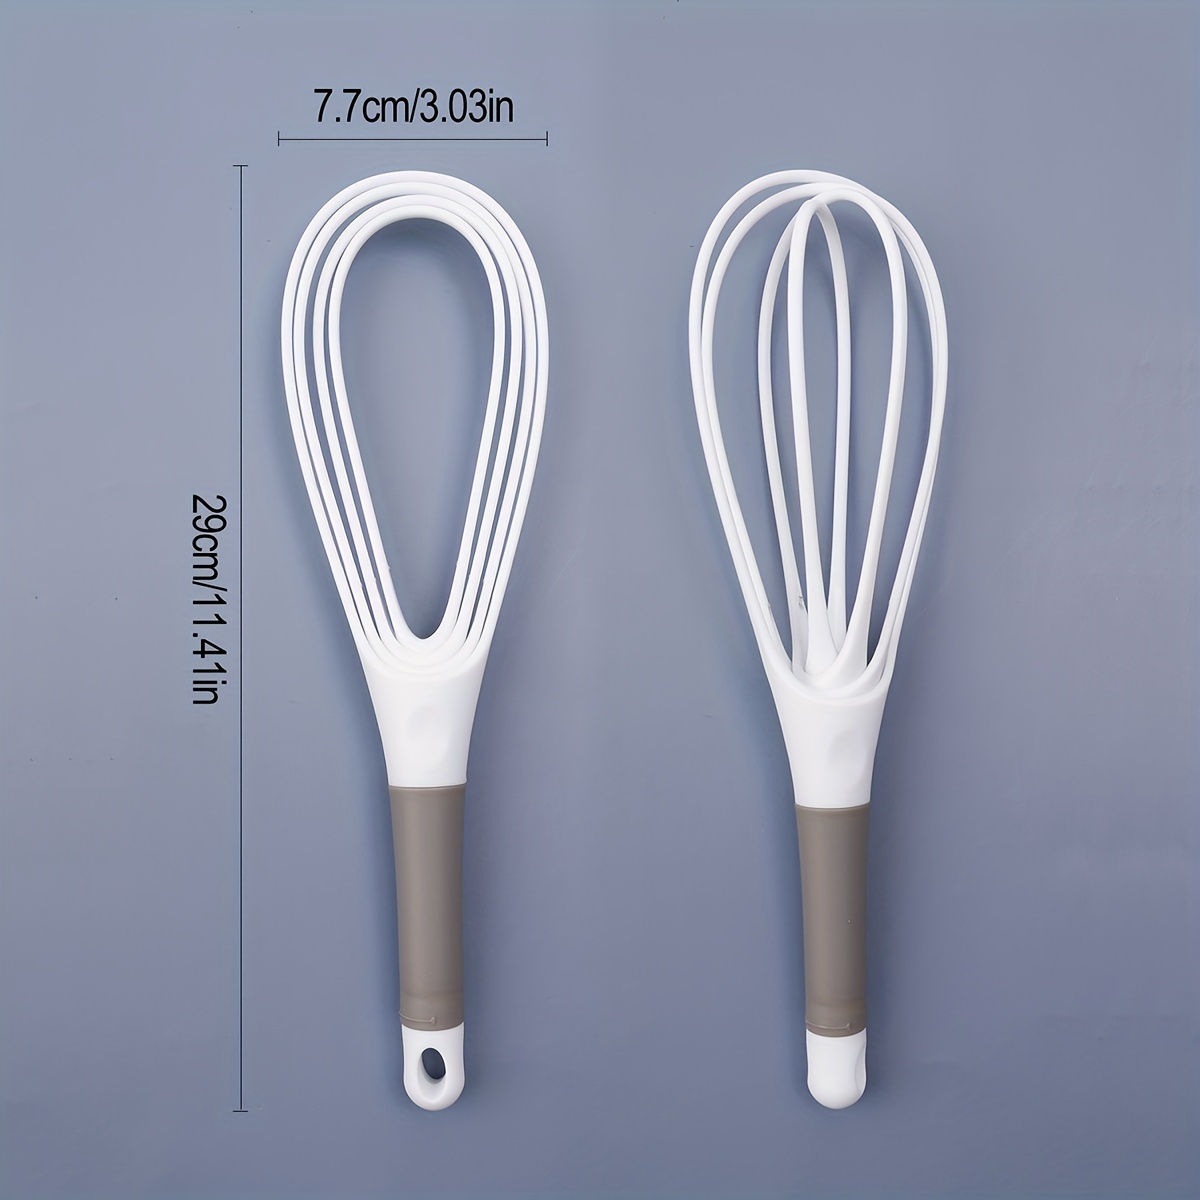 Twist Whisk 2-In-1 Balloon And Flat Plastic Wire - Buy Twist Whisk 2-In-1  Balloon And Flat Plastic Wire Product on